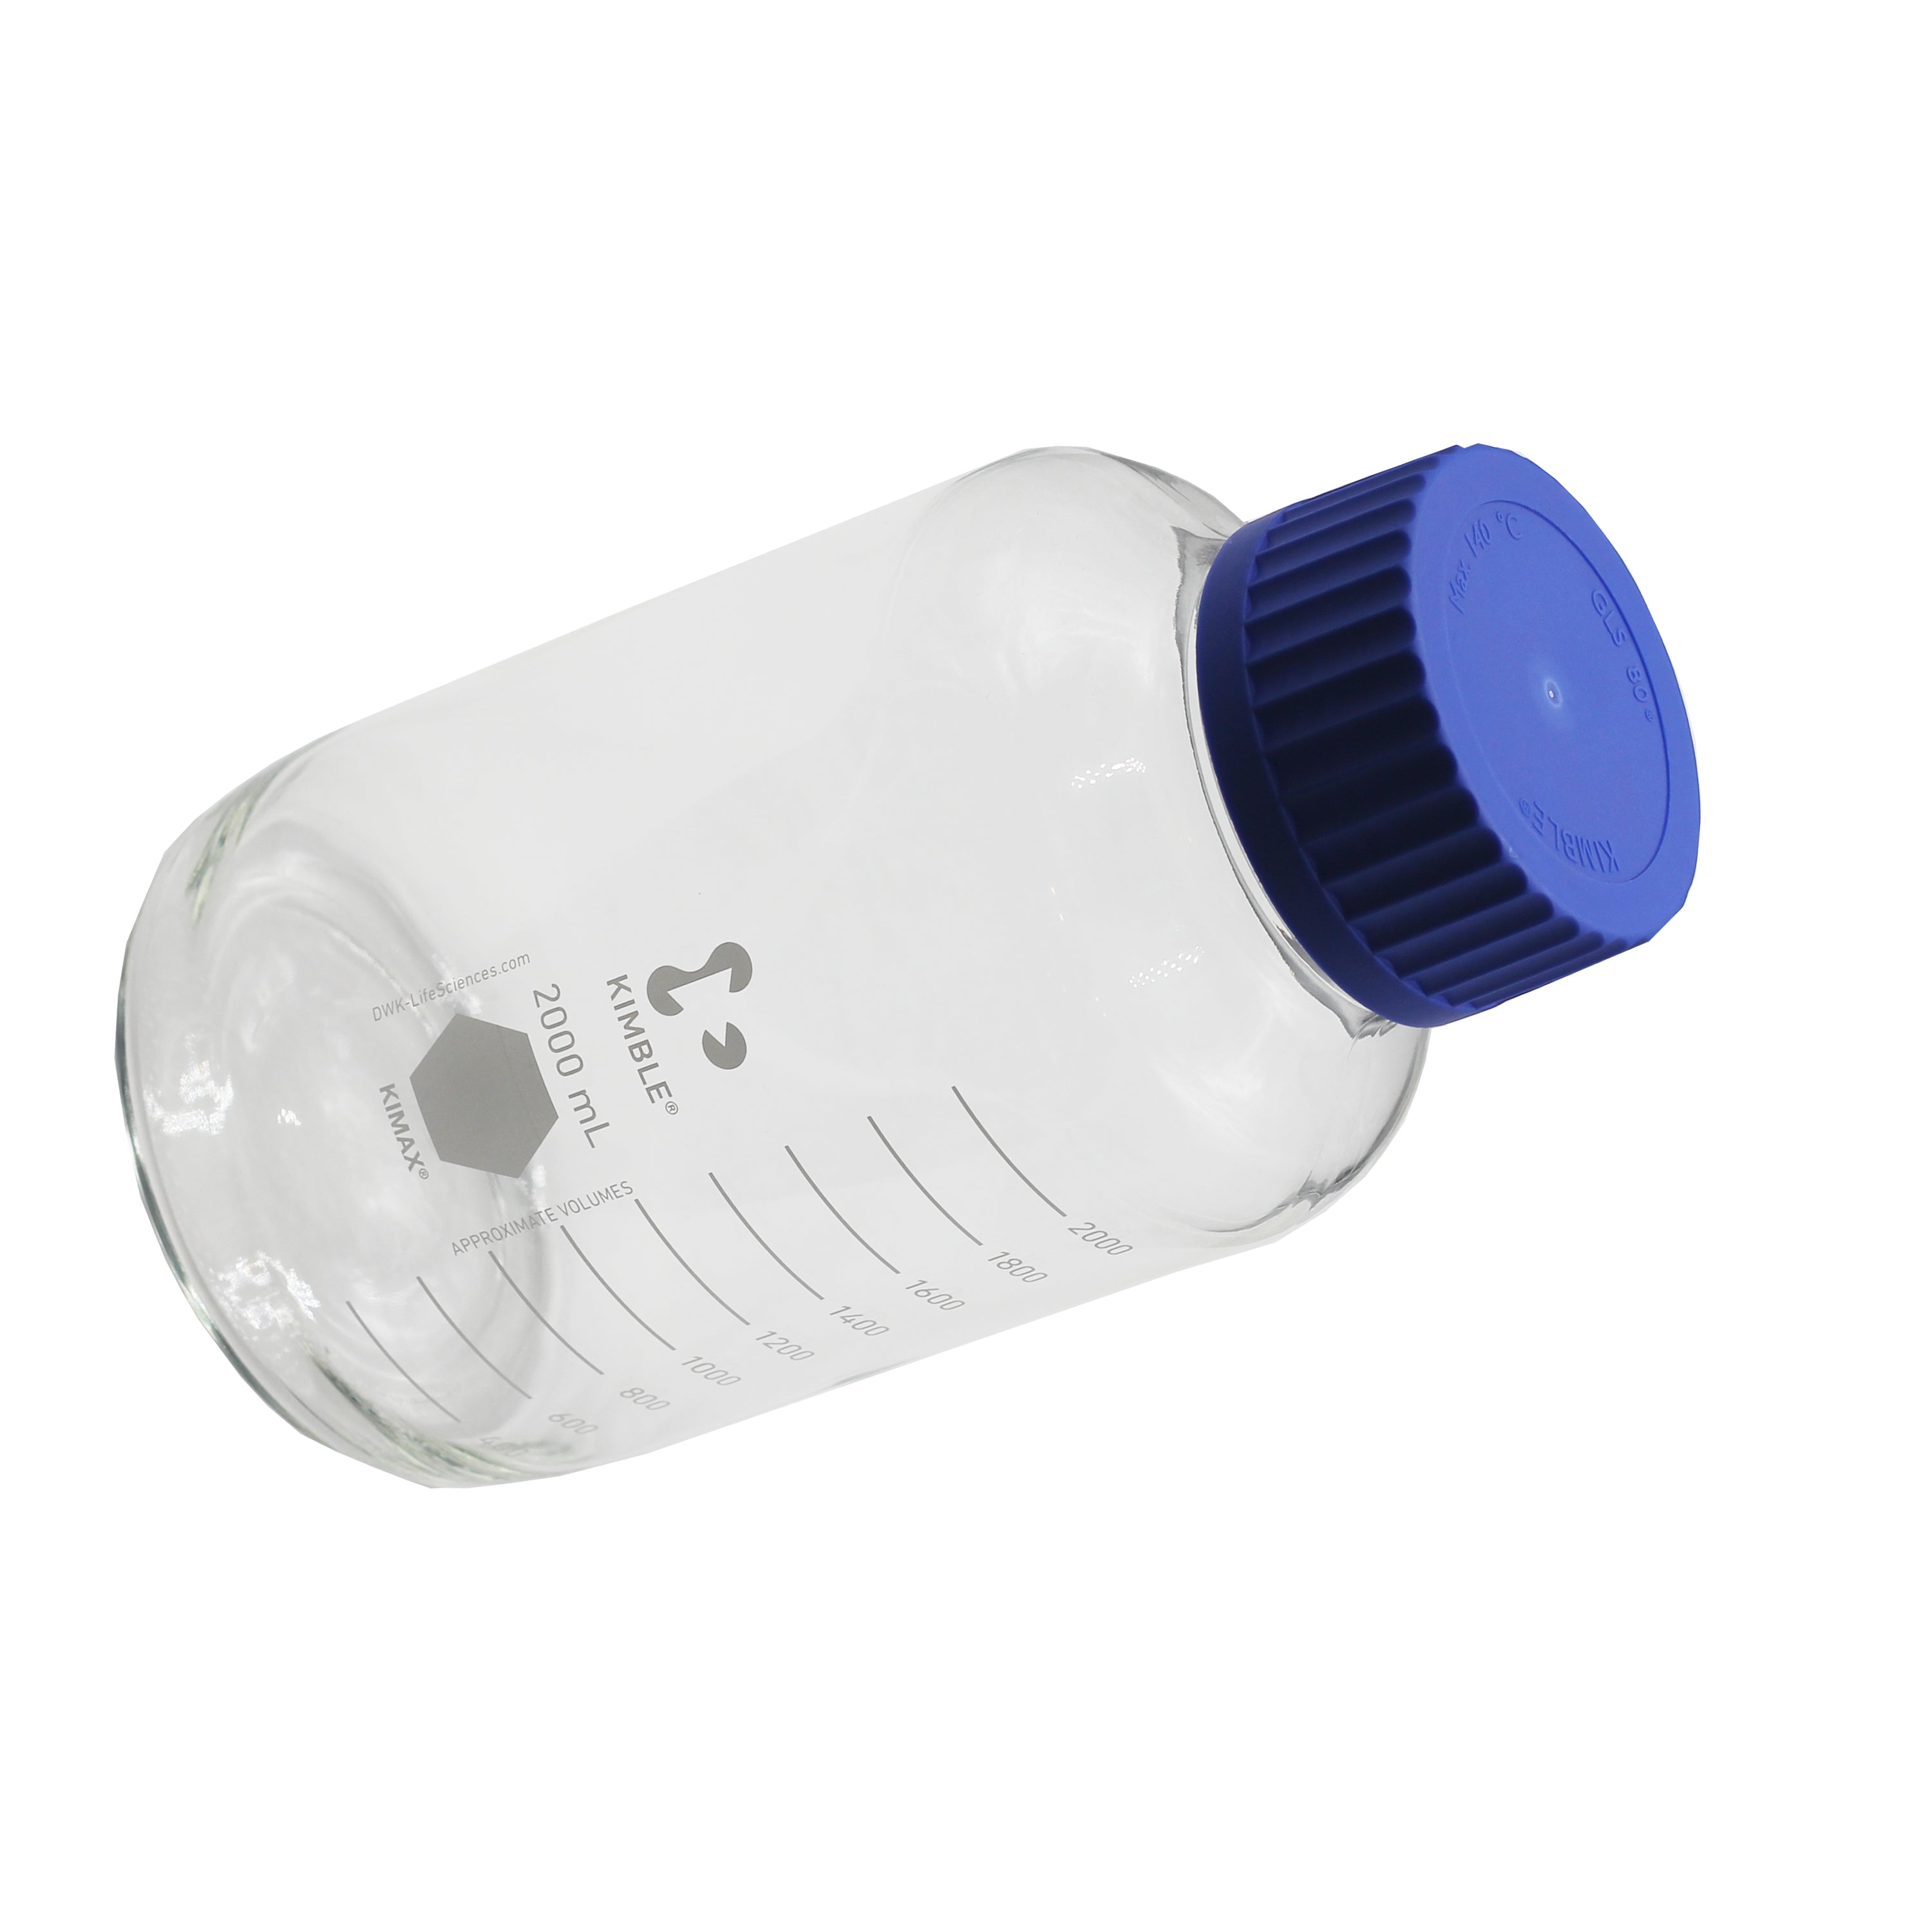 Duran 1 Liter GL45 Lab Glass Bottle, Plastic Coated, w/ Stock Screw Cap &  Pour Ring